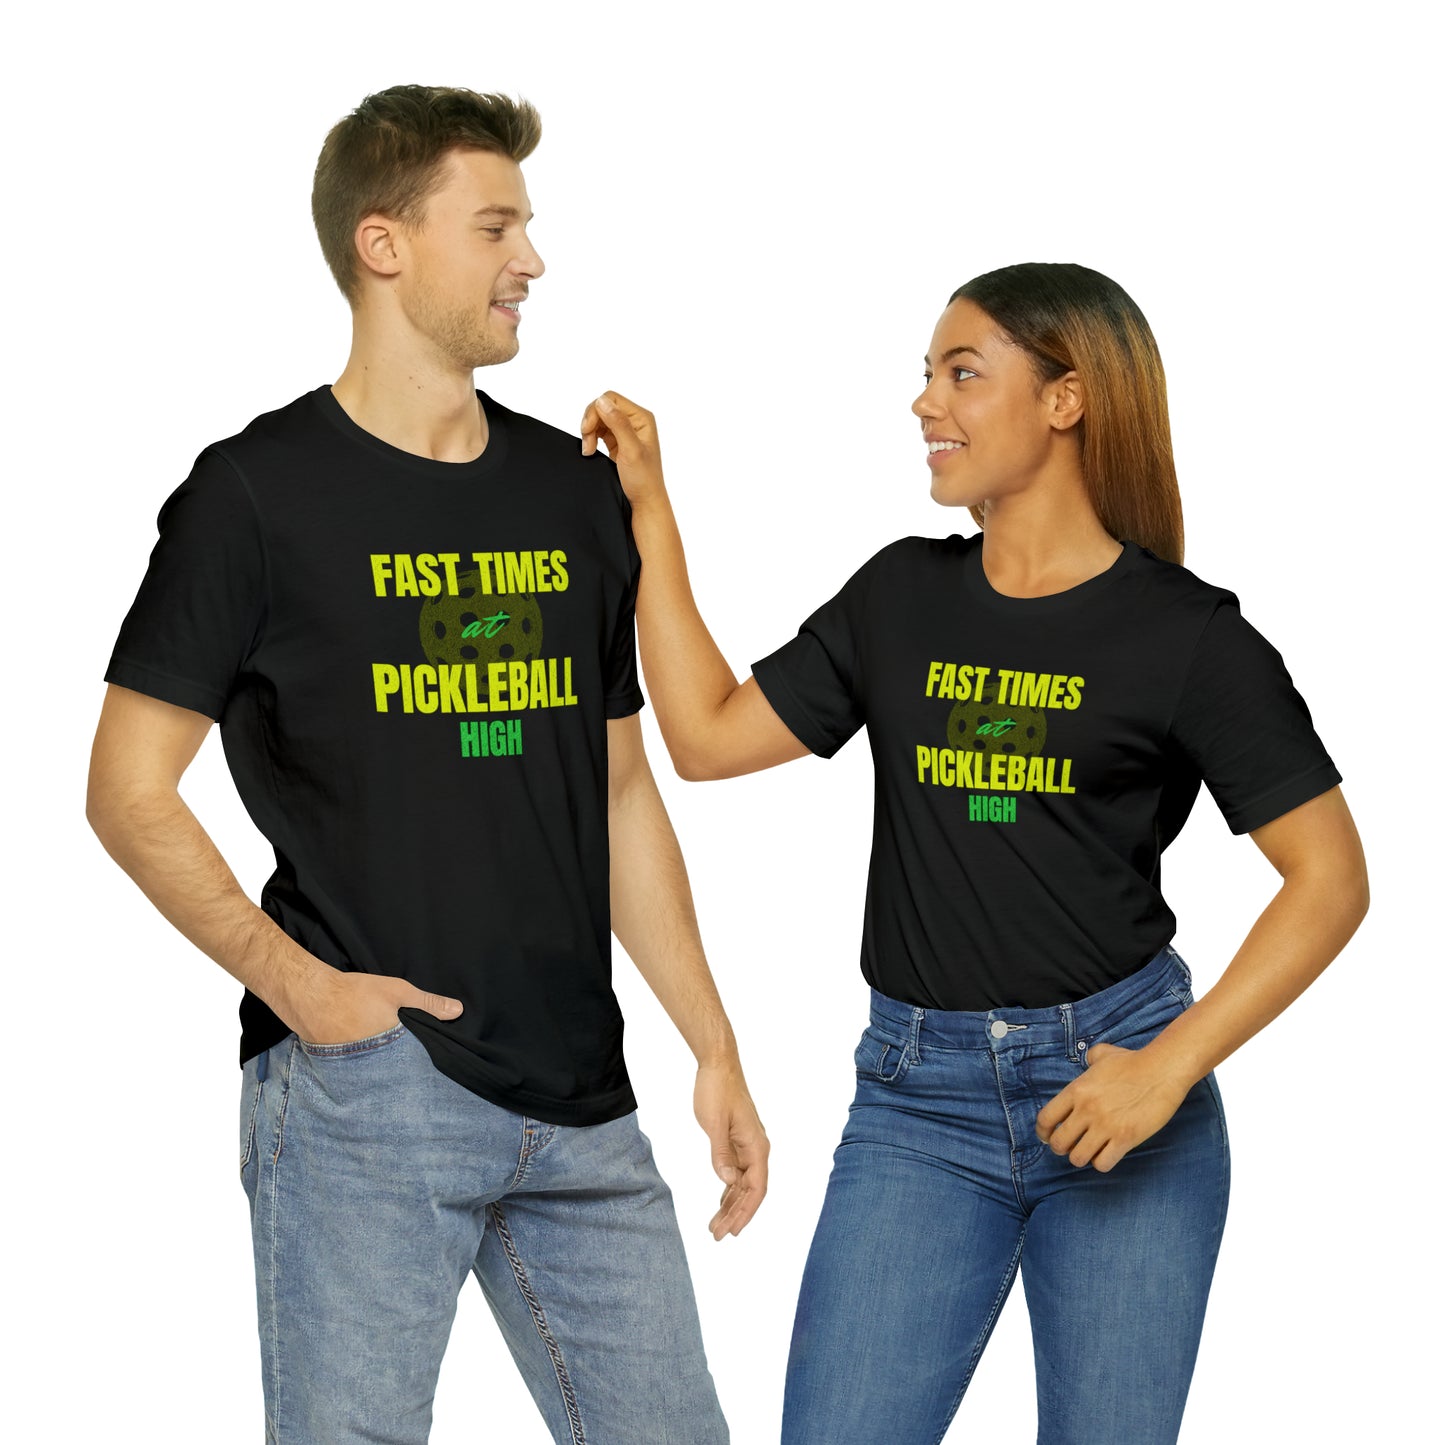 Fast Times at Pickleball High: T-Shirt